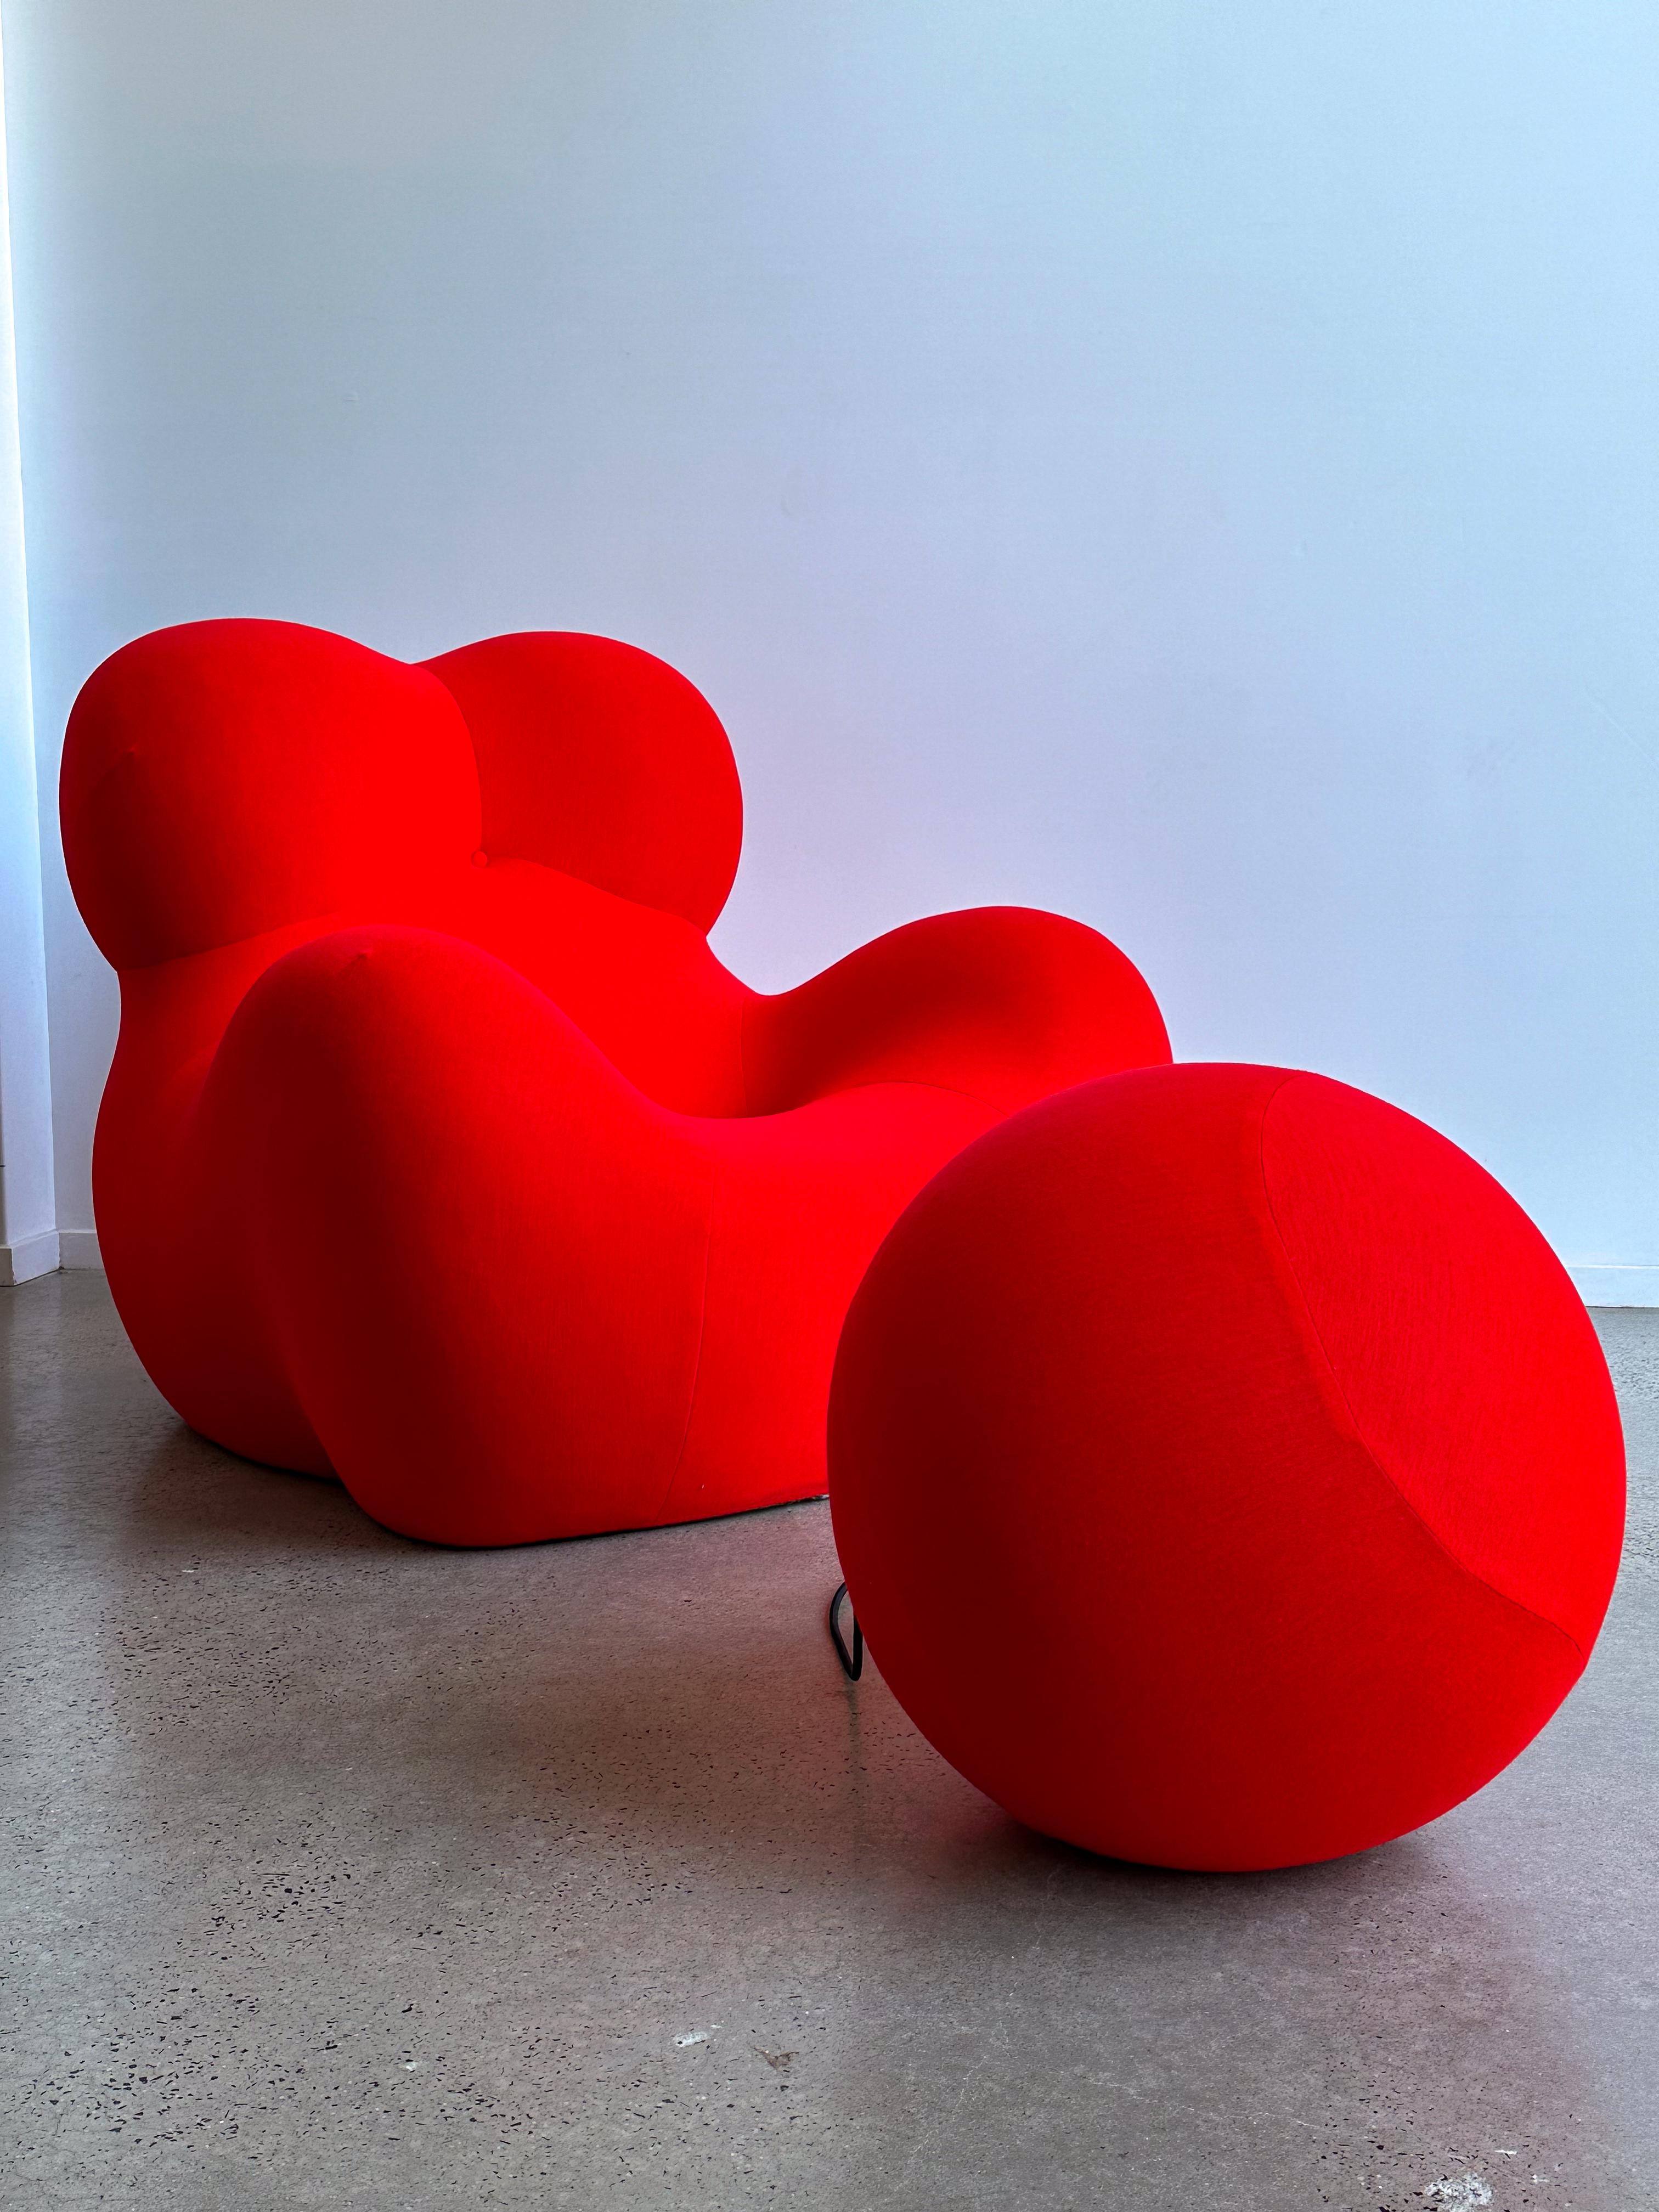 NOT  A 2000 SERIES 
Since its first appearance, the Up Series, designed in 1969 by Gaetano Pesce, has been one of the most talked about examples of modern furniture design. The exceptional visual impact of six models of ball-like seats in various